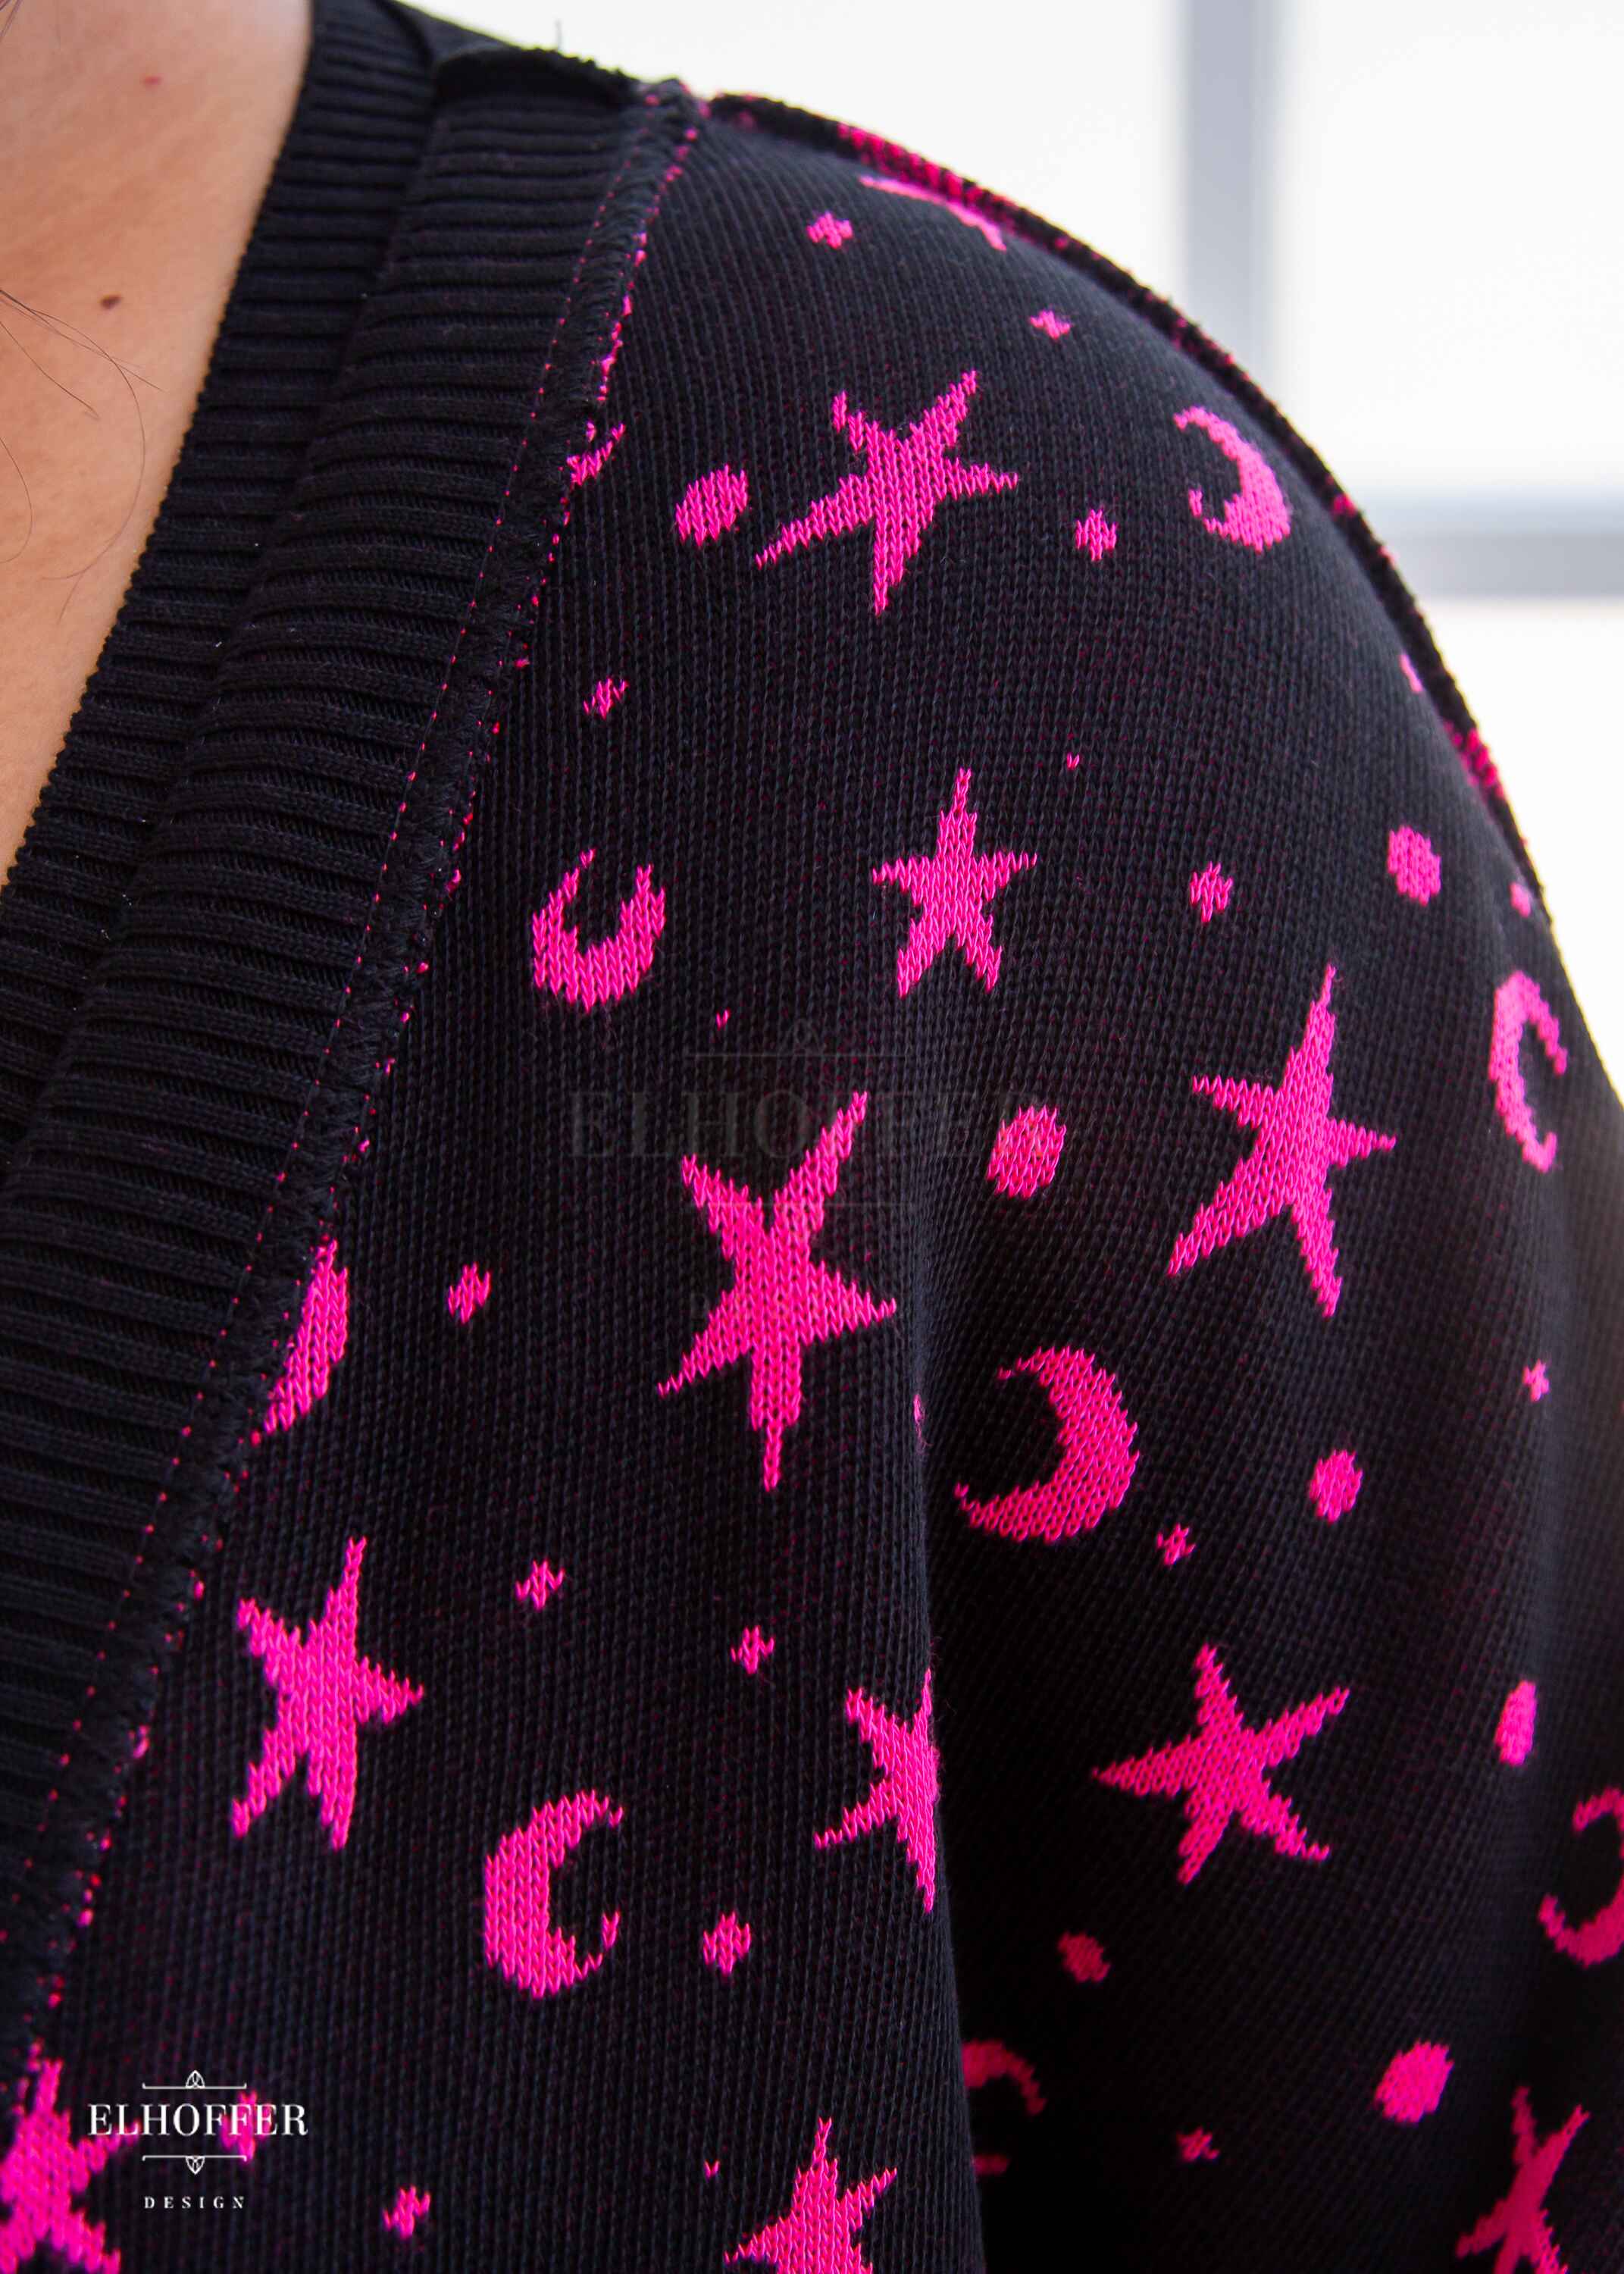 A closeup of the knit texture and star and moon pattern.